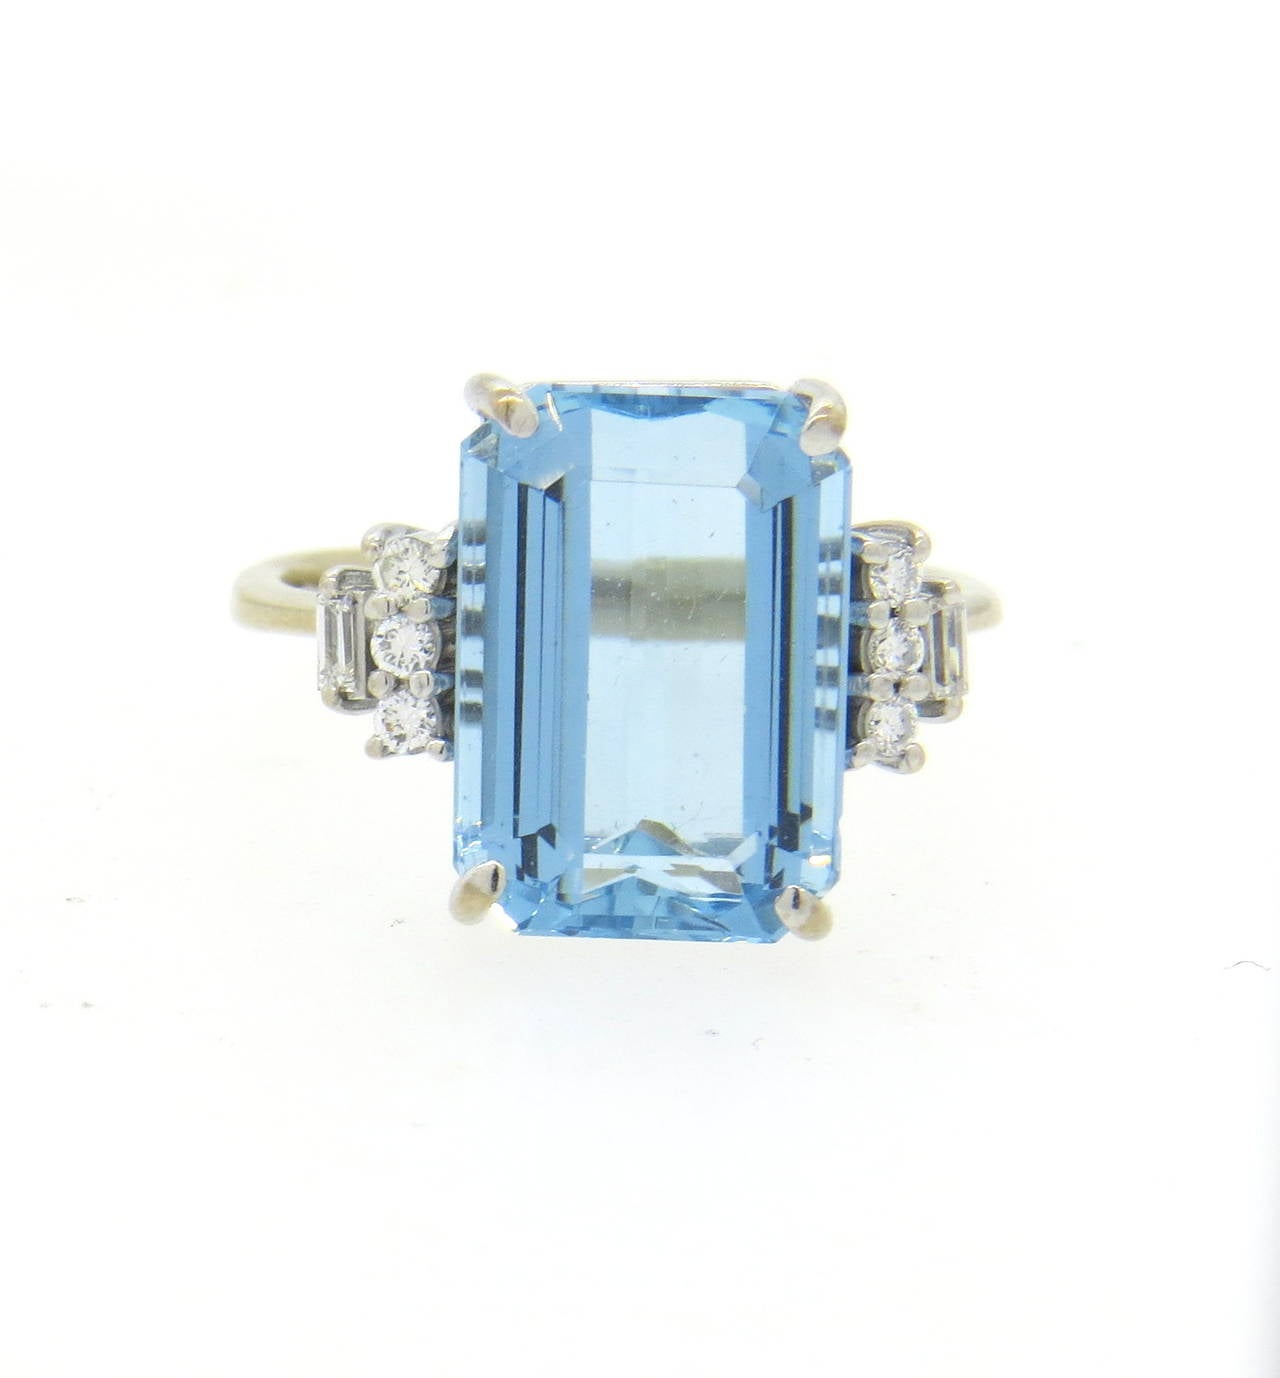 18k gold ring by H. Stern, featuring 13.1mm x 9.6mm x 6.5mm aquamarine, surrounded with round and baguette diamonds. Ring is a size 7. Marked 750 and with H Stern mark. Weight of the piece - 5.4 grams
Comes in H Stern box